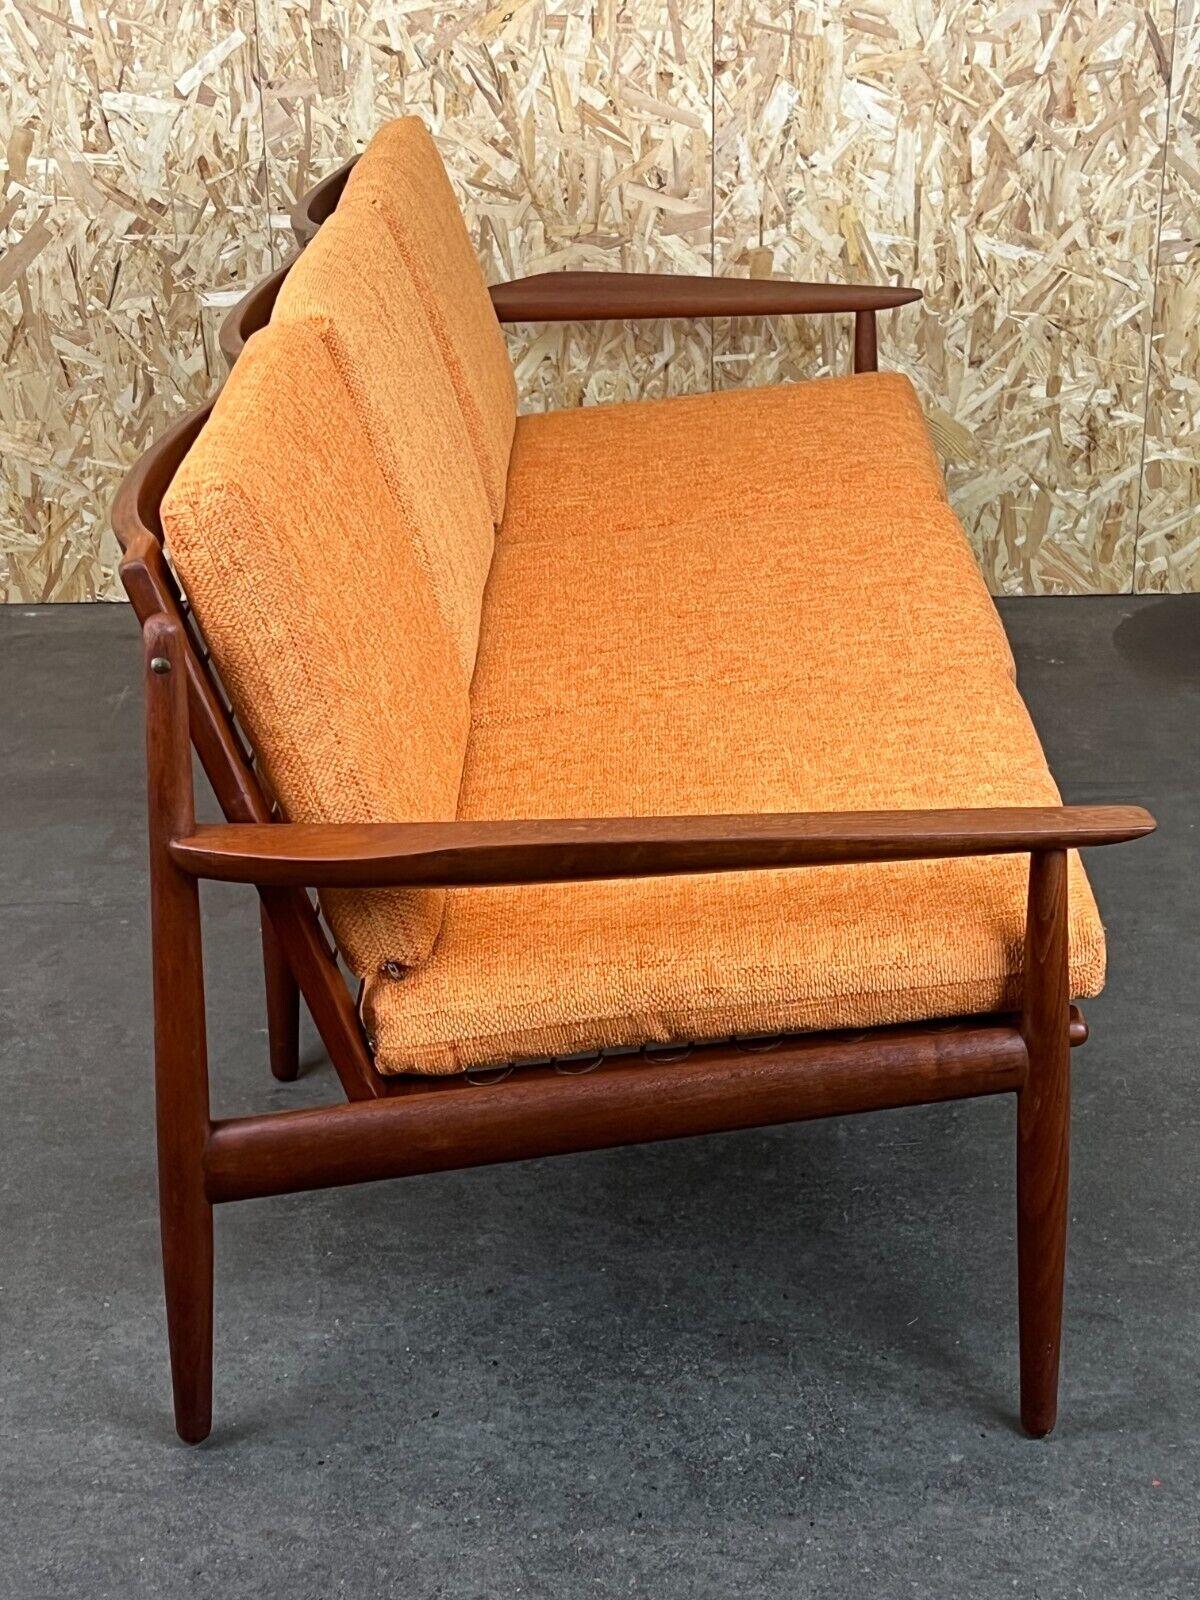 60s 70s teak sofa couch 3-seater Svend Aage Eriksen for Glostrup Danish Design  For Sale 1